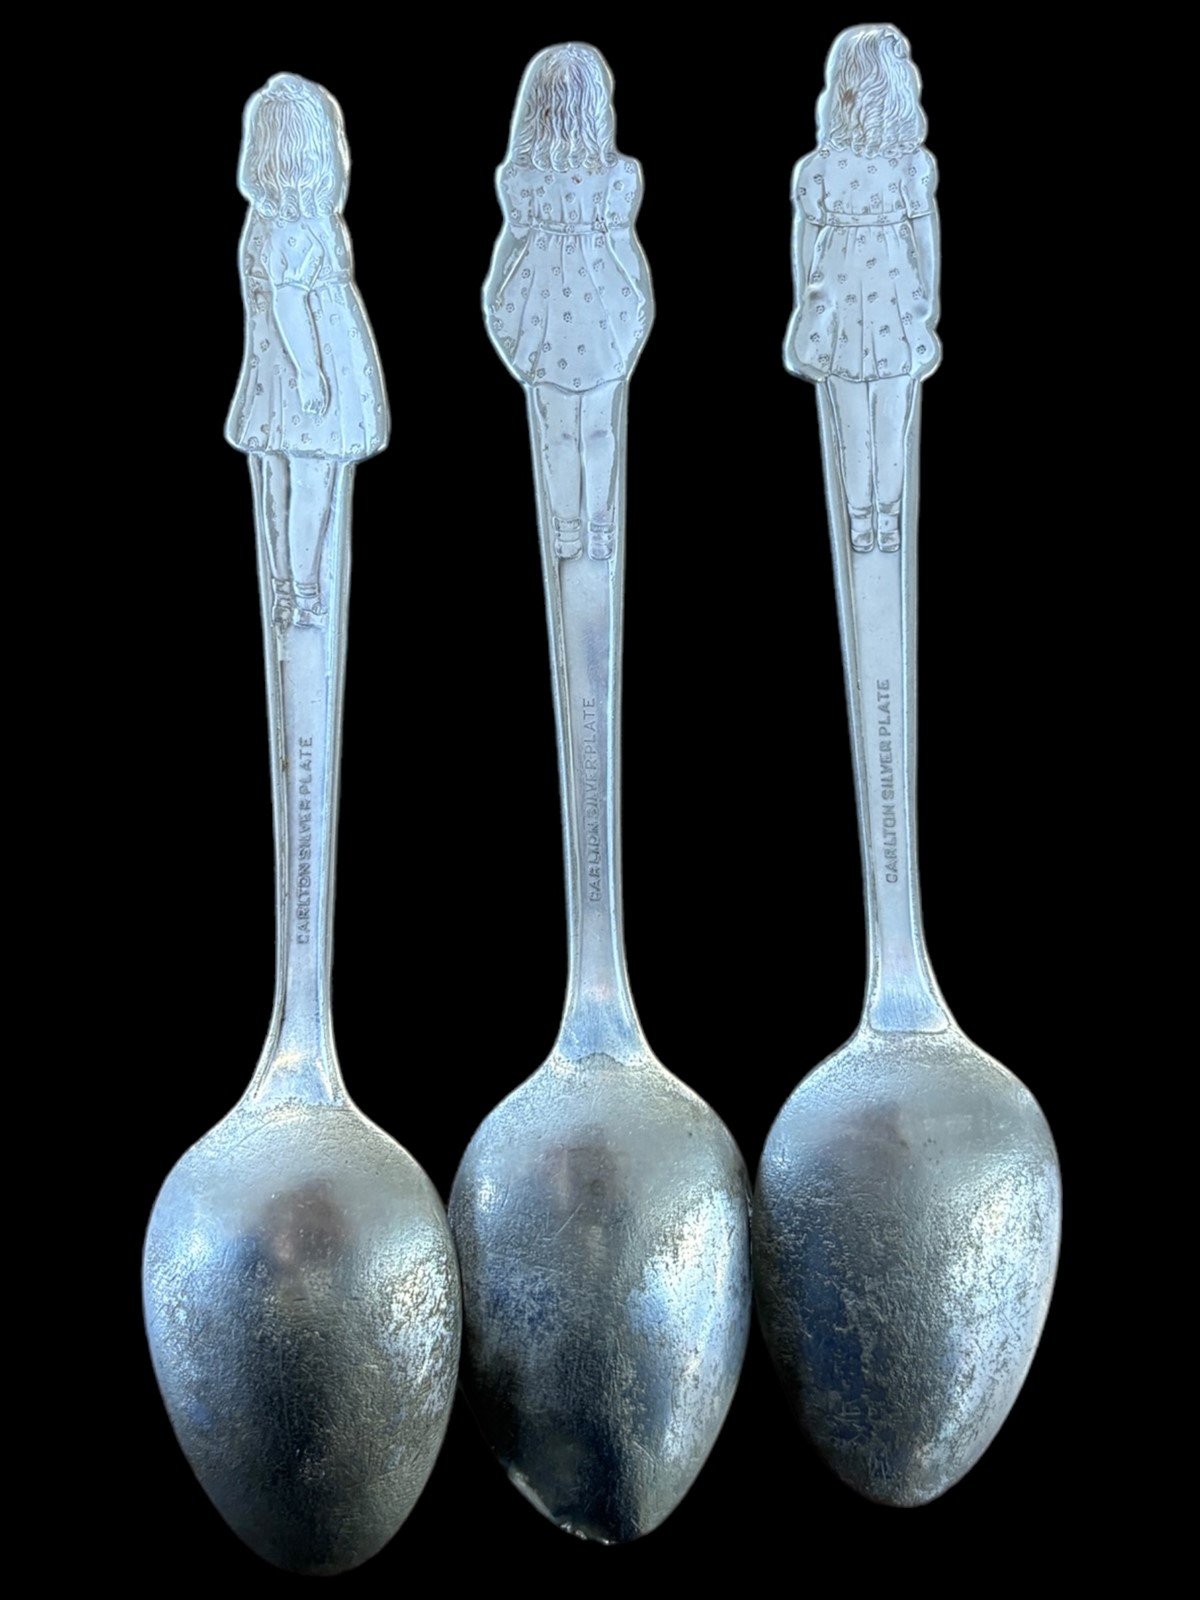 Carlton Silverplate Silver Spoons Marie, Yvonne, and Cecile set of 3